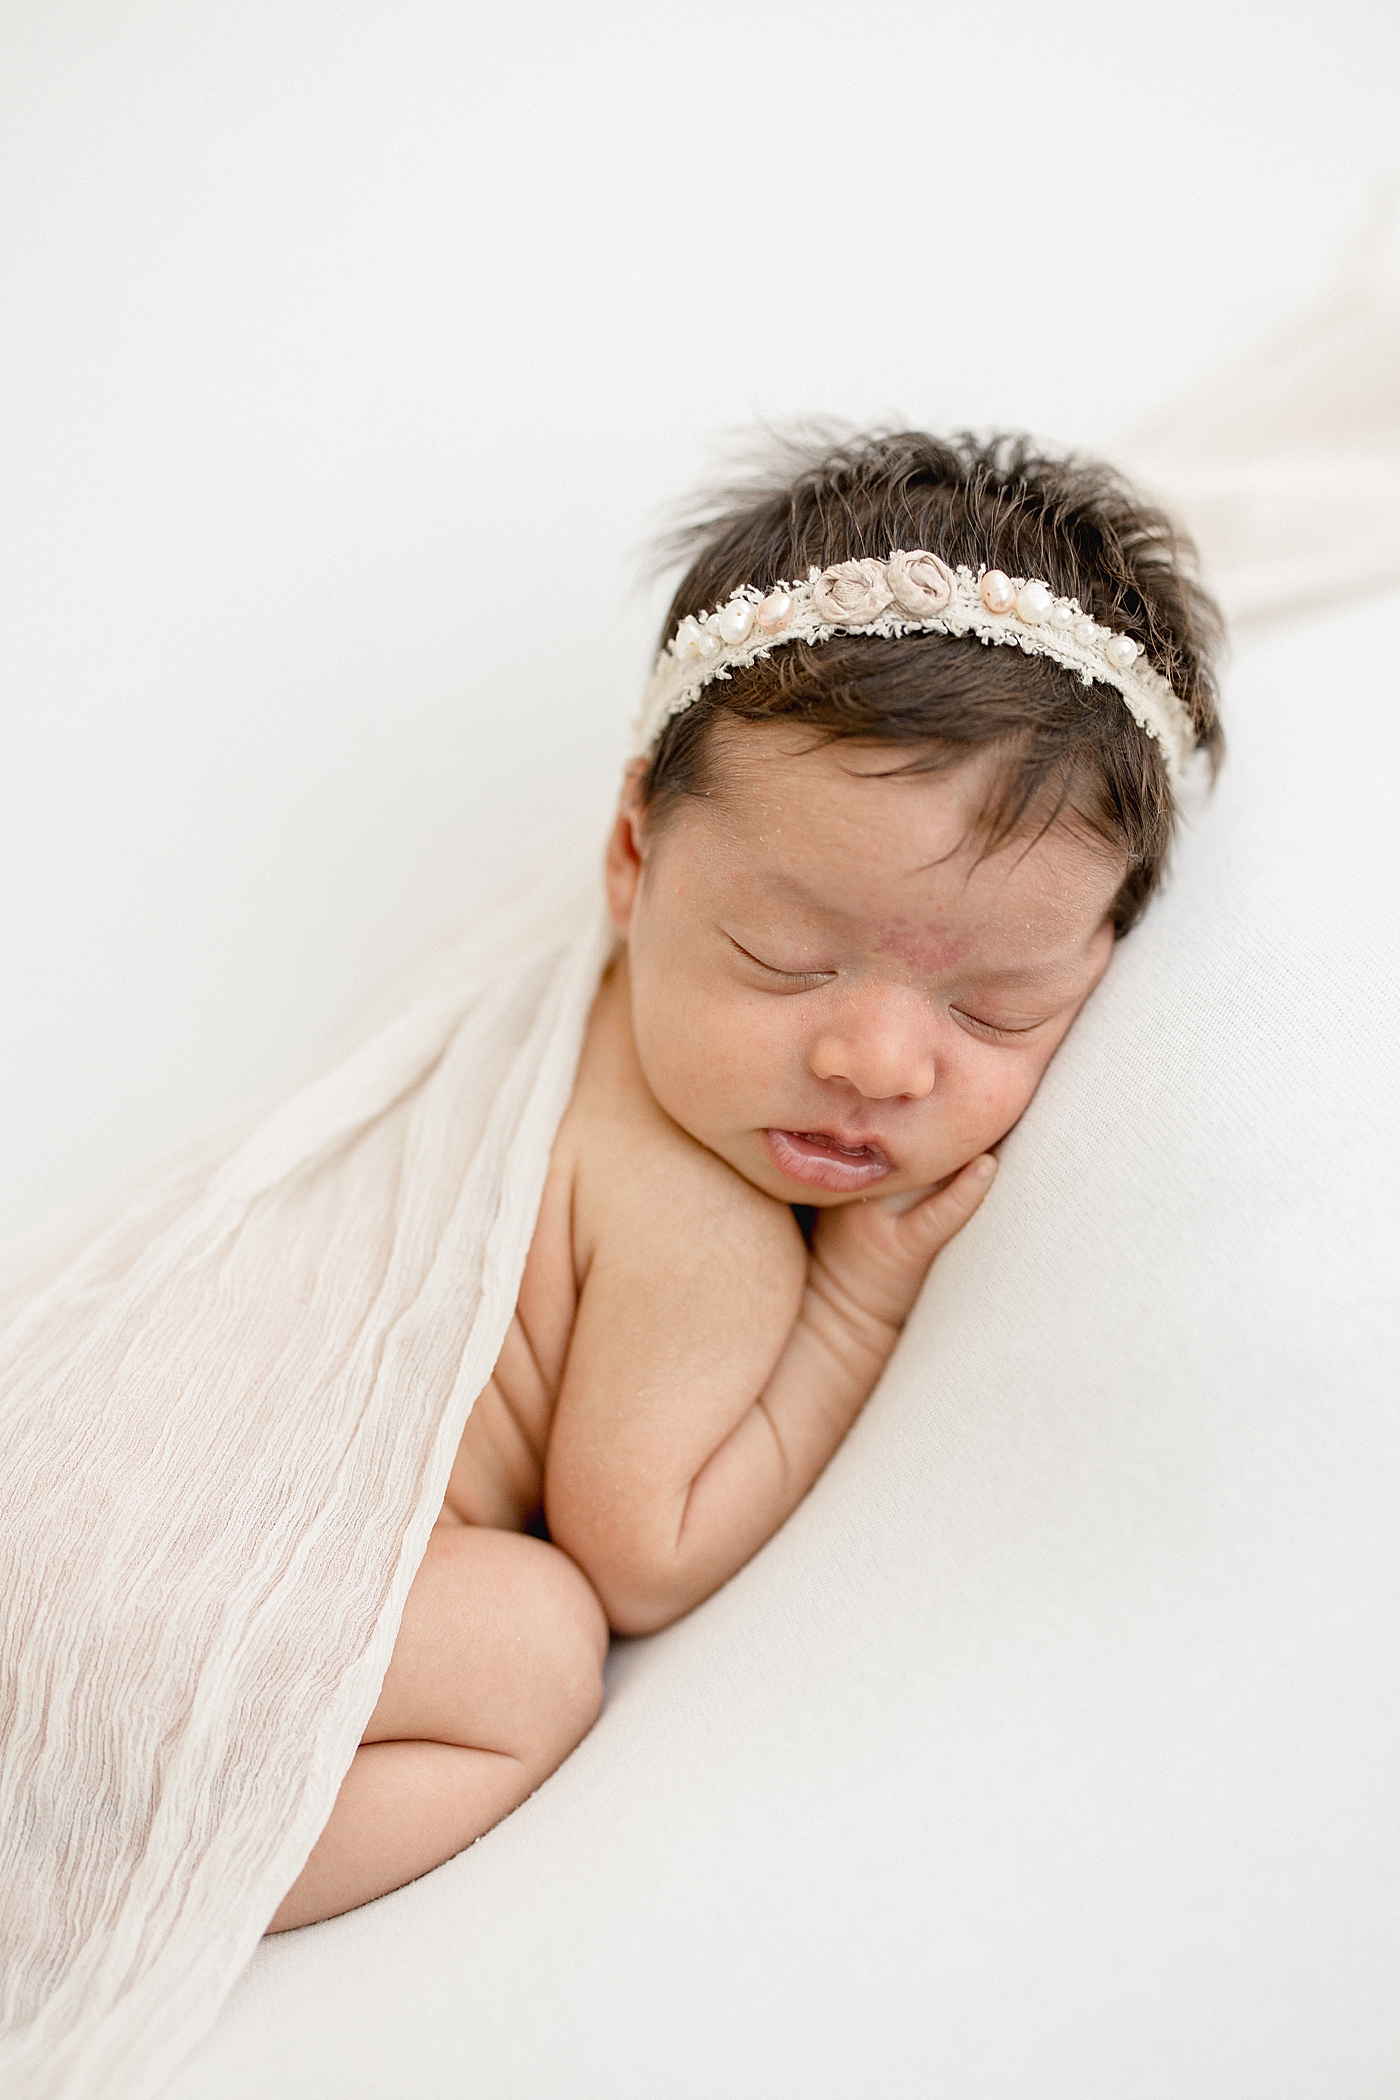 Studio newborn session for baby girl in Tampa, FL. Photo by Brittany Elise Photography.